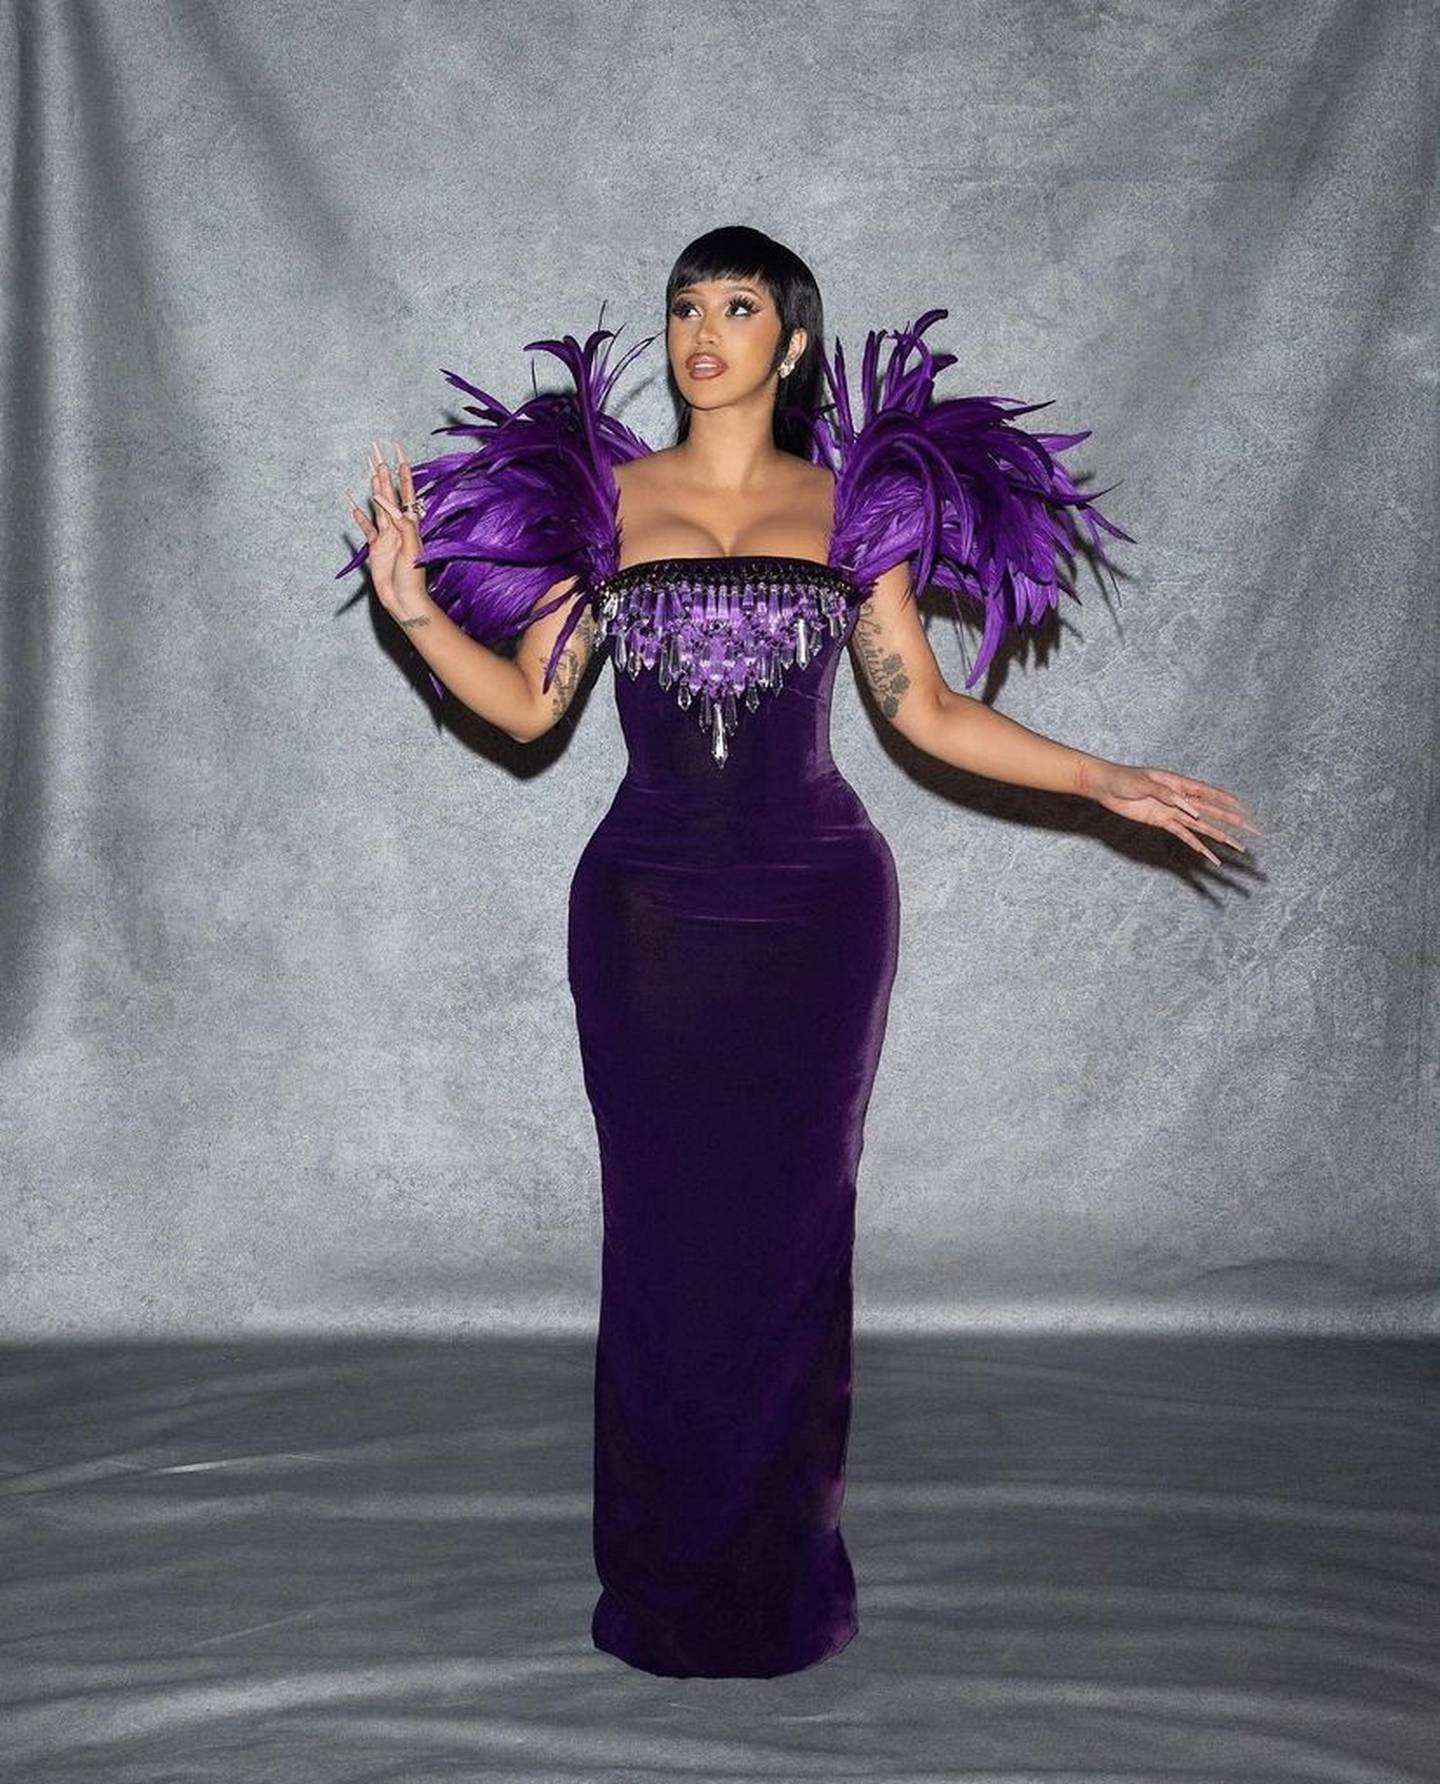 To host the American Music Awards in November, singer Cardi B wore a black and purple feather dress by Lebanese designer Jean-Louis Sabaji. Getty